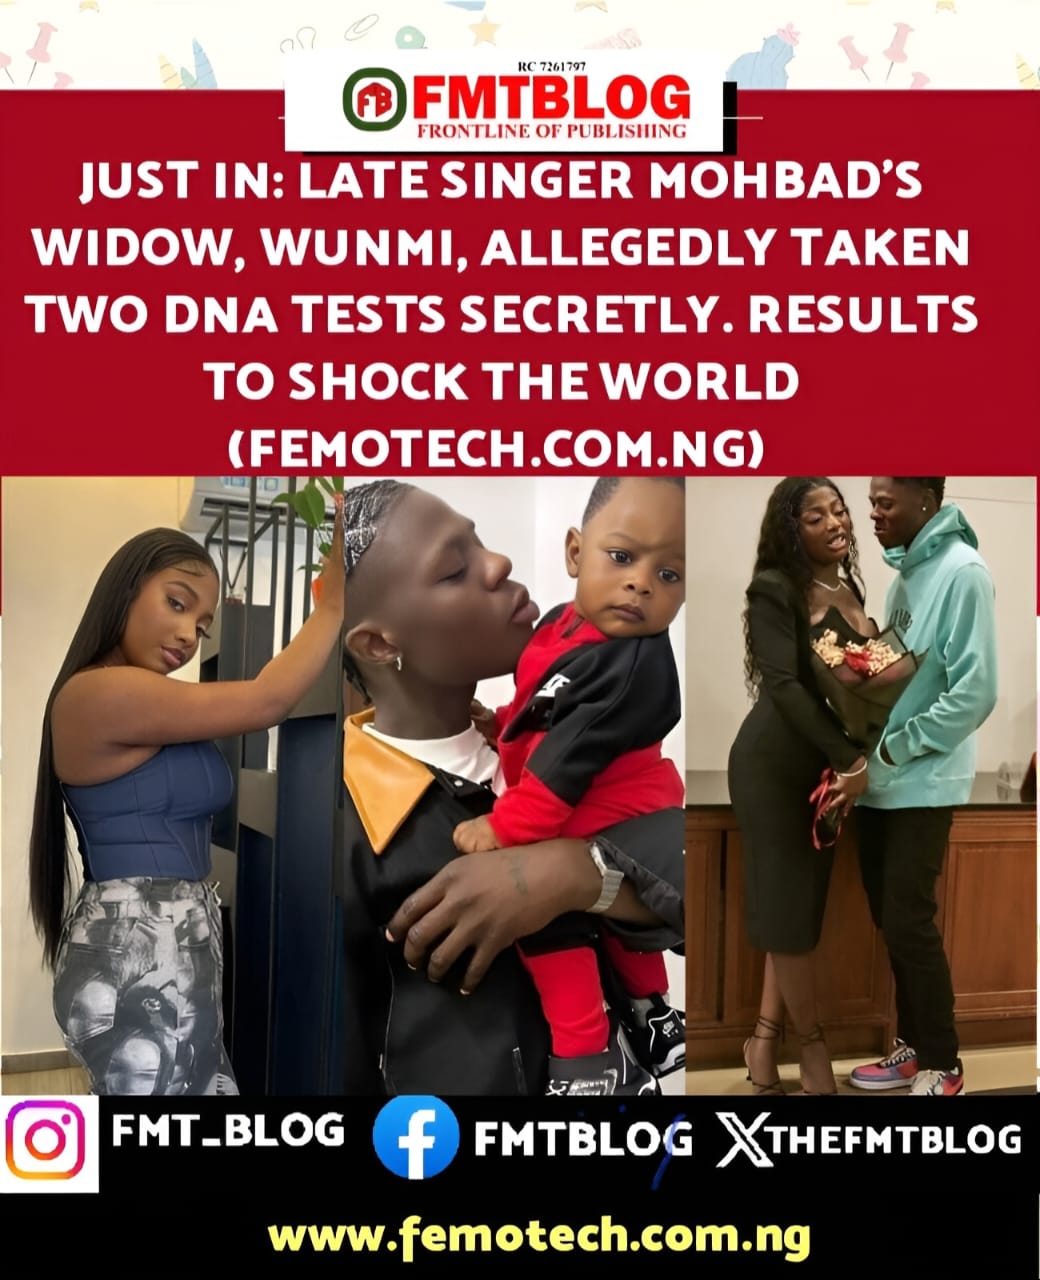 JUST IN- Late Singer Mohbad’s Widow, Wunmi, Allegedly Taken Two DNA Tests Secretly, Results To Shock The World